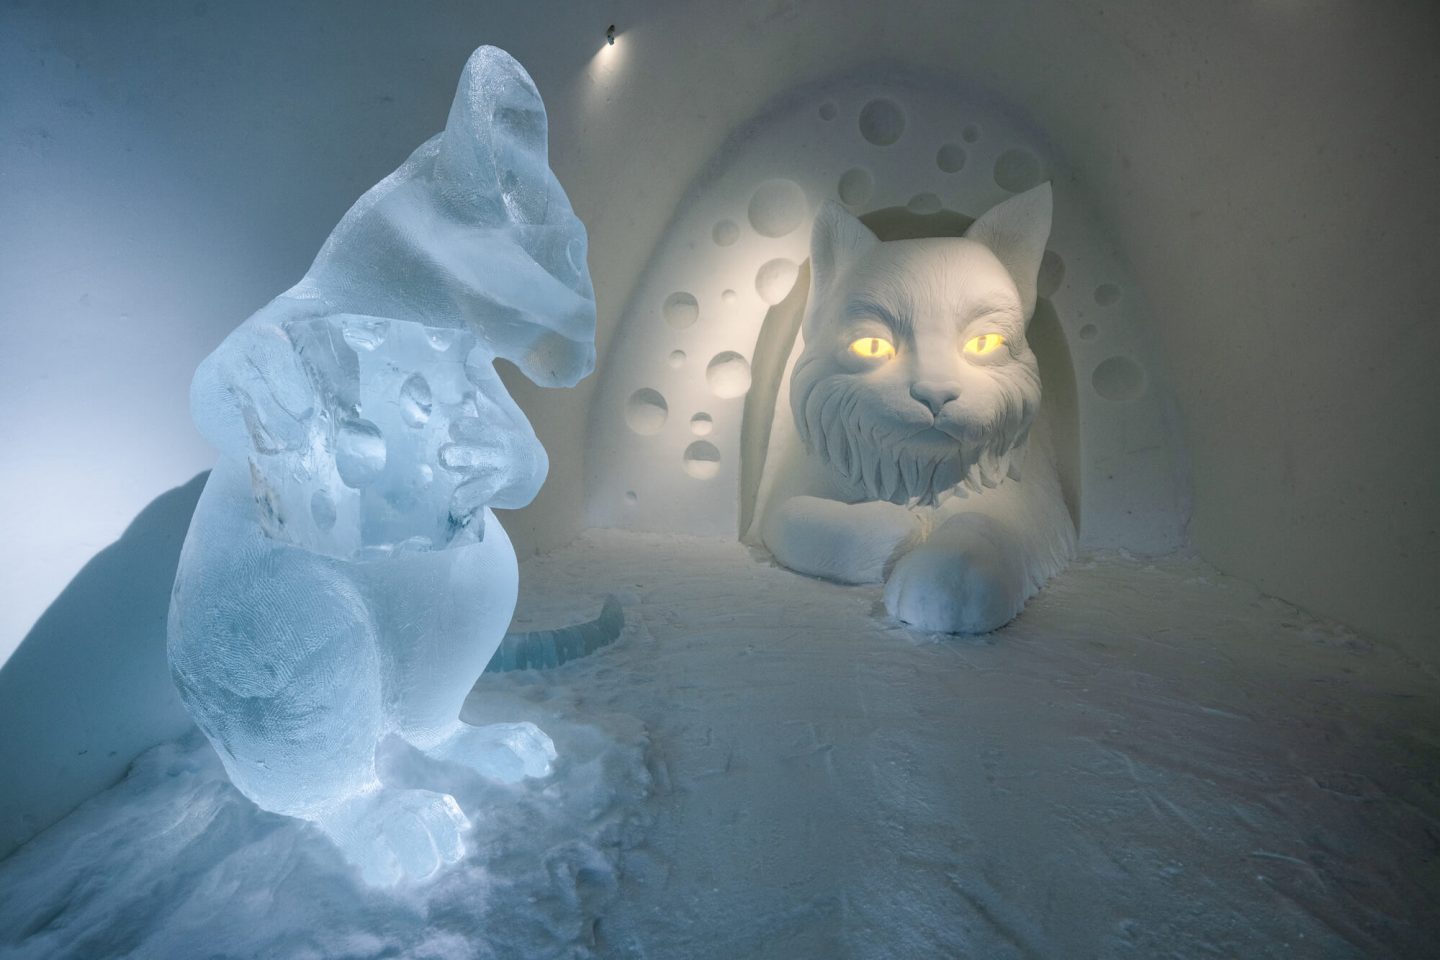 icehotel34-frozen-moment-deluxe-art-suite-by-tjasa-gusfors-and-hanneke-supply-ak